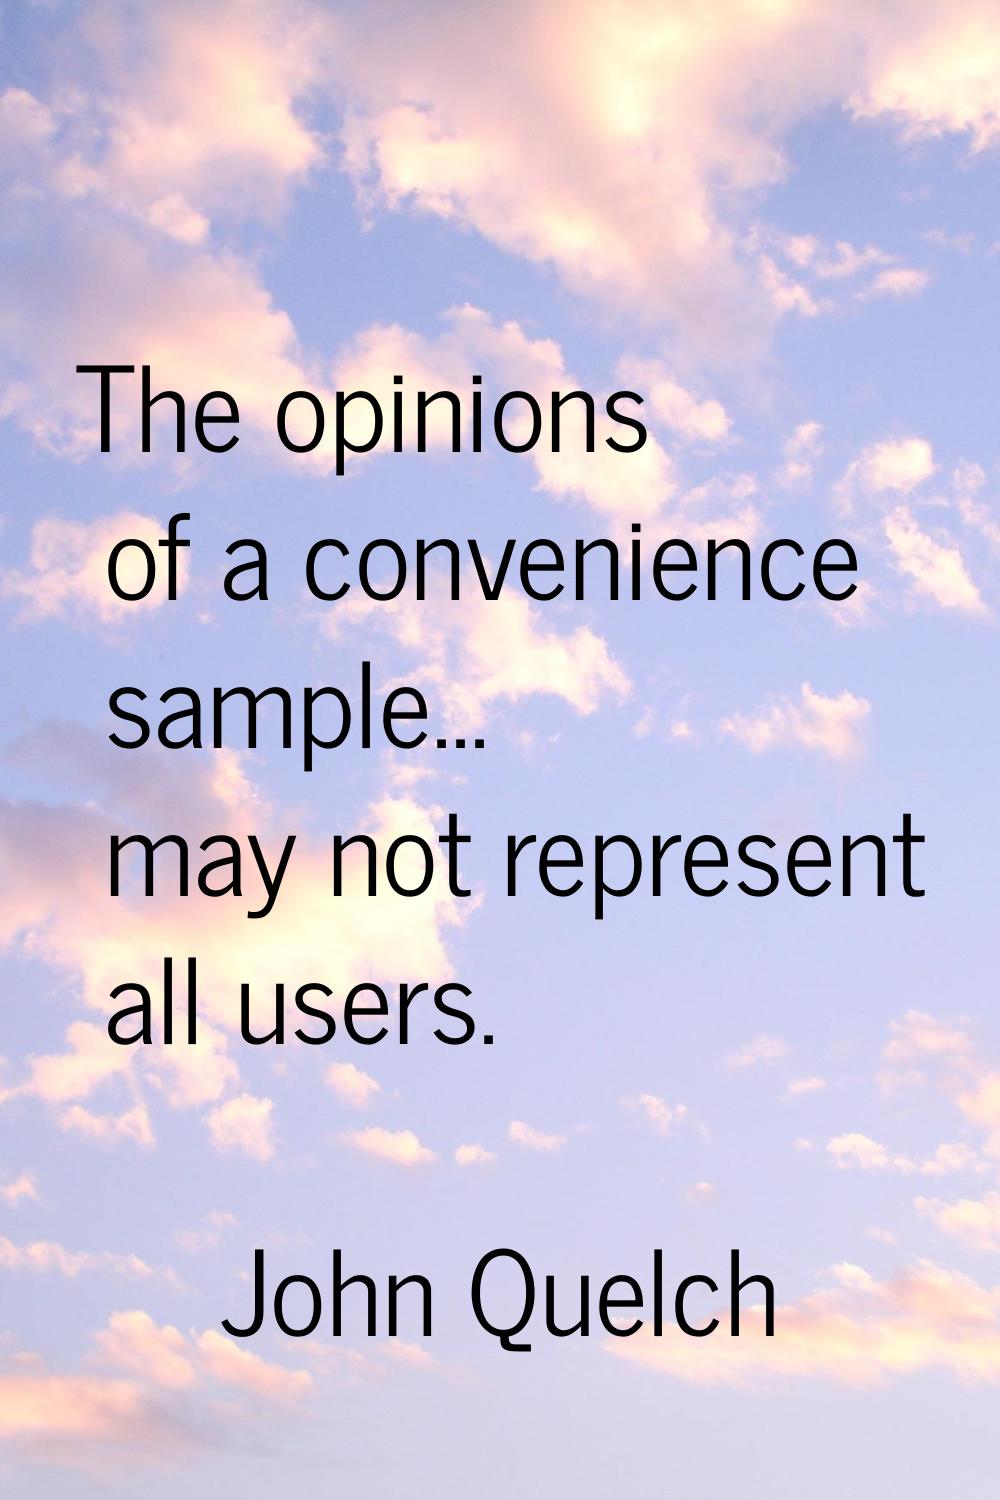 The opinions of a convenience sample... may not represent all users.